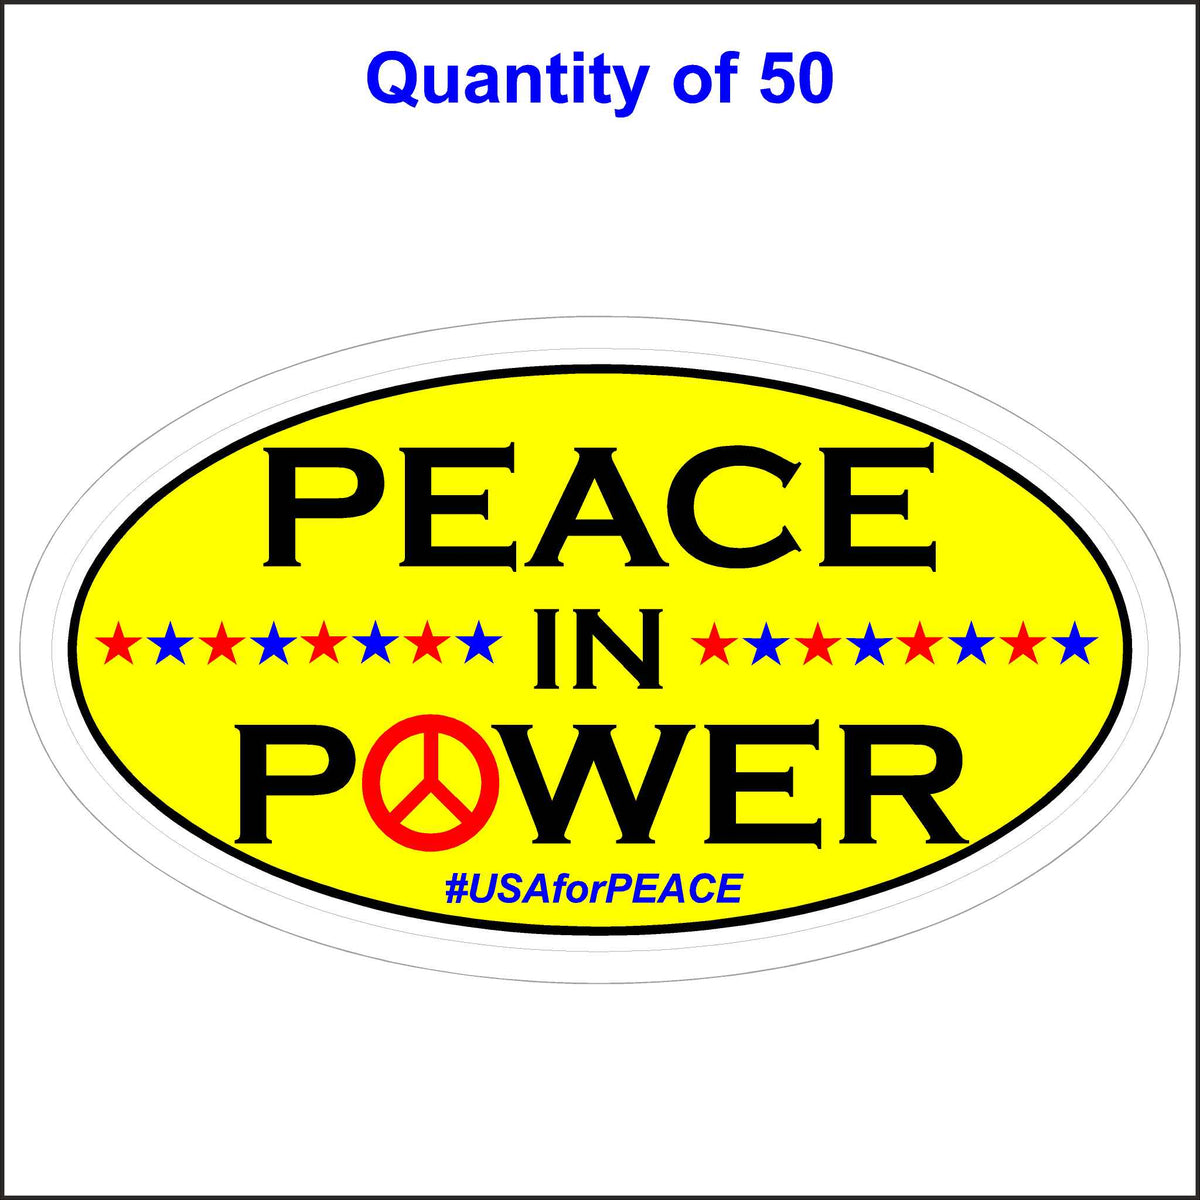 Peace in Power - Peace Sticker, USA For Peace. 50 Quantity.